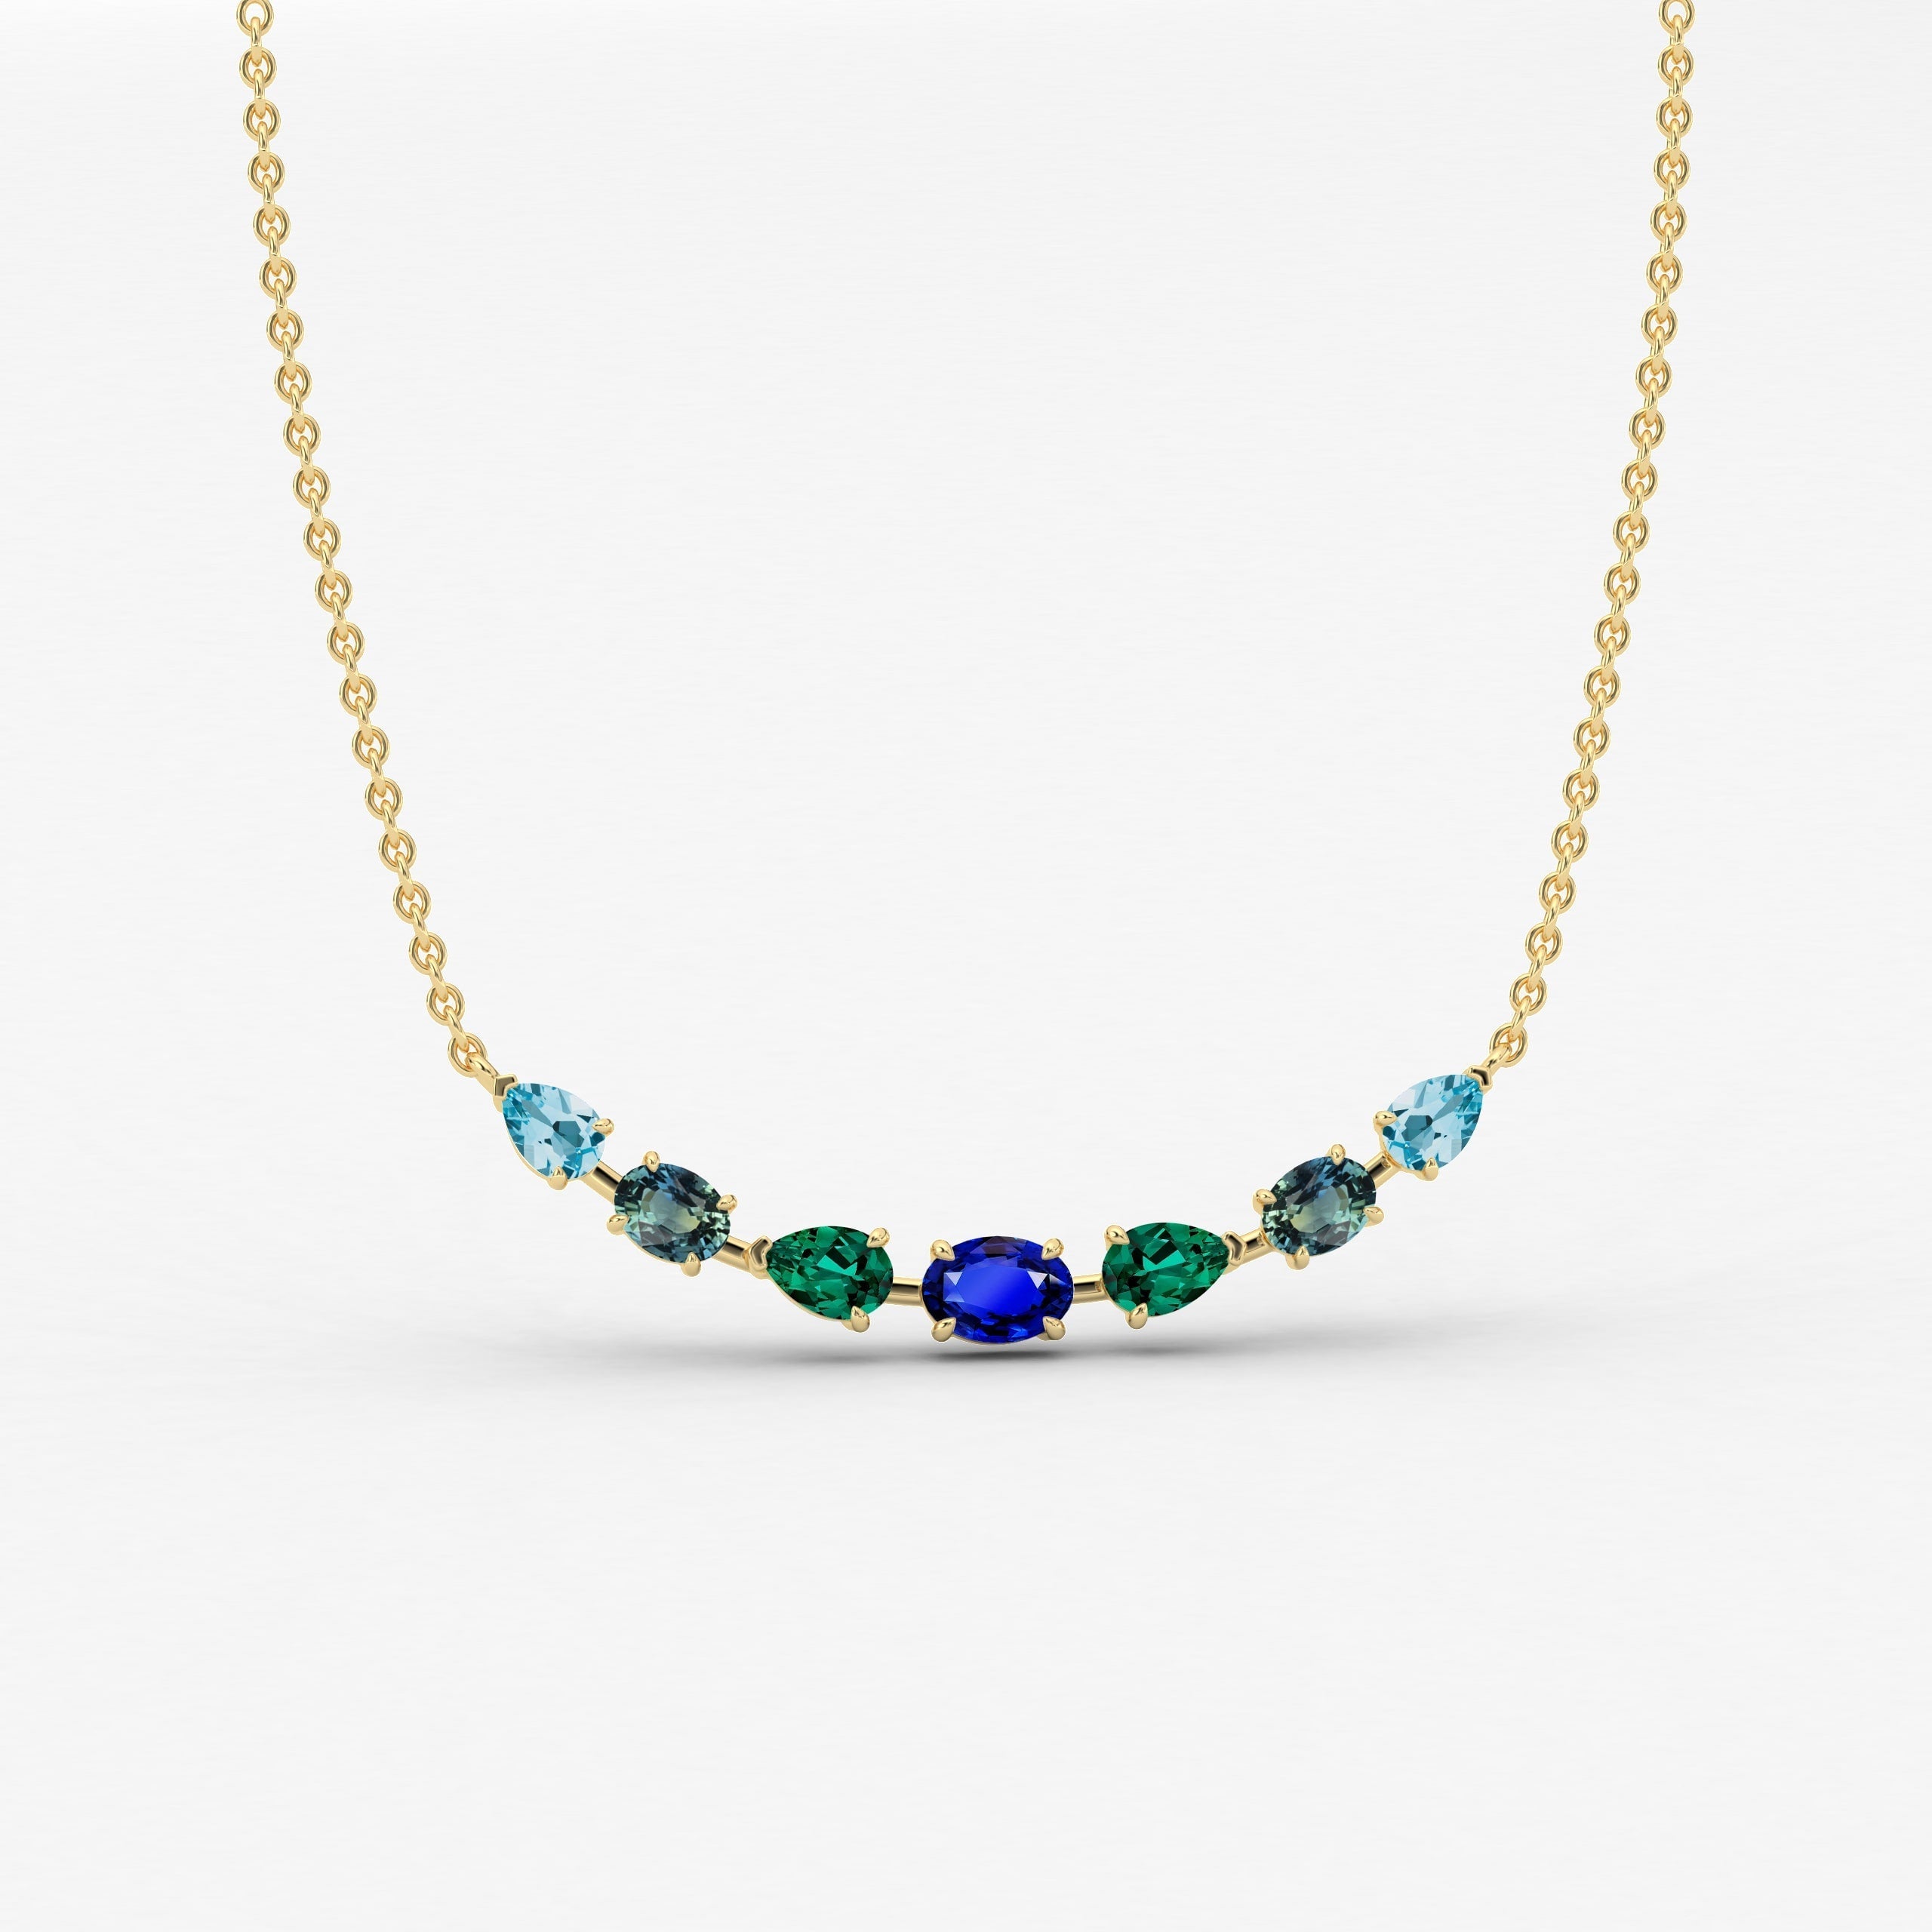 Blue sapphire and London topaz gemstone necklace in yellow gold